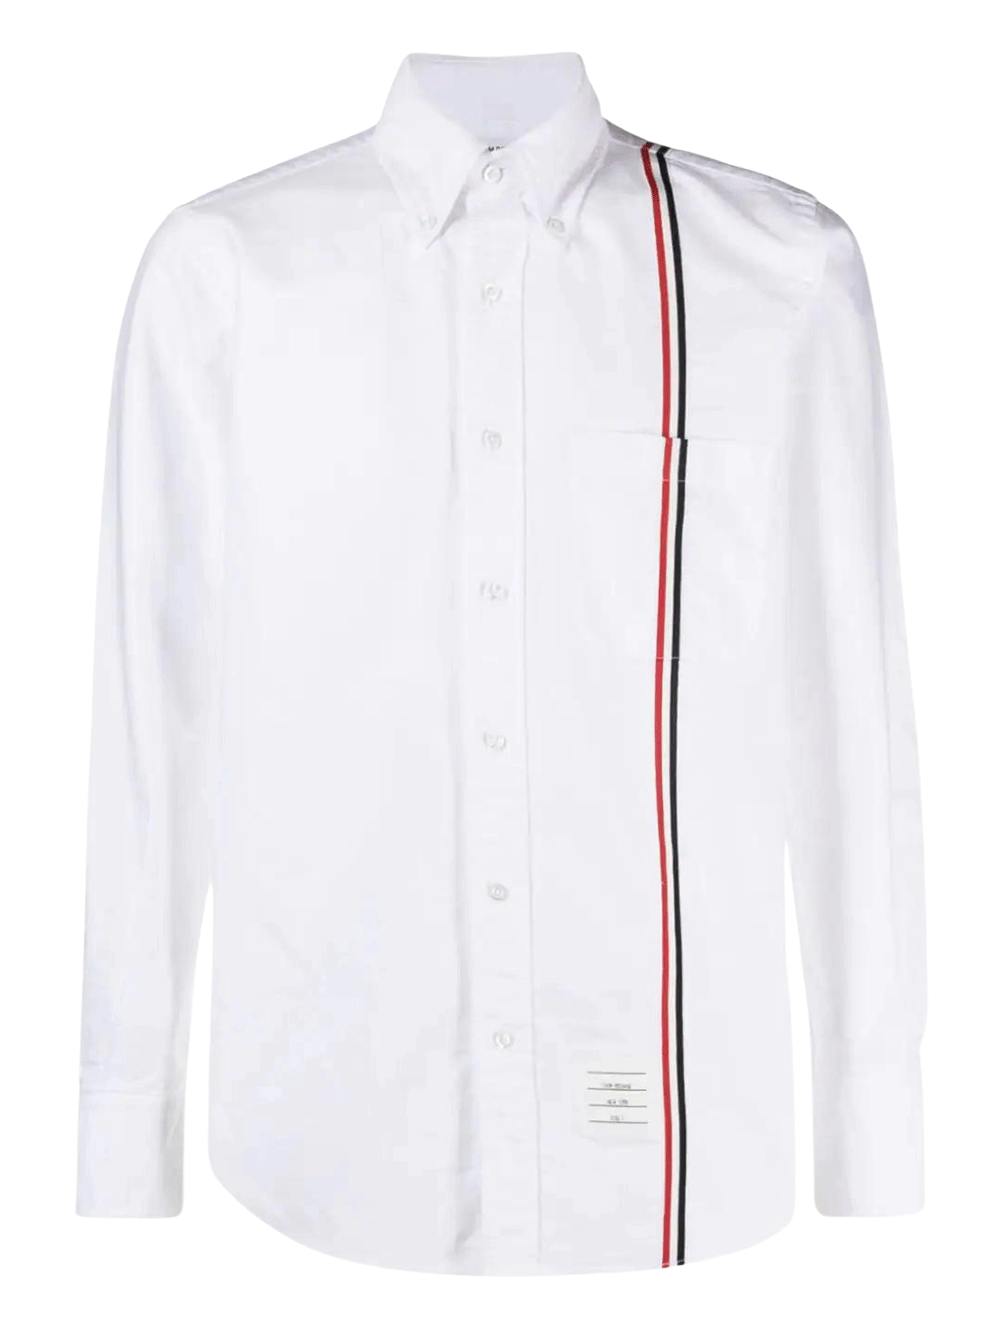 Thom-Browne-Straight-Fit-Button-Down-Shirt-White-1